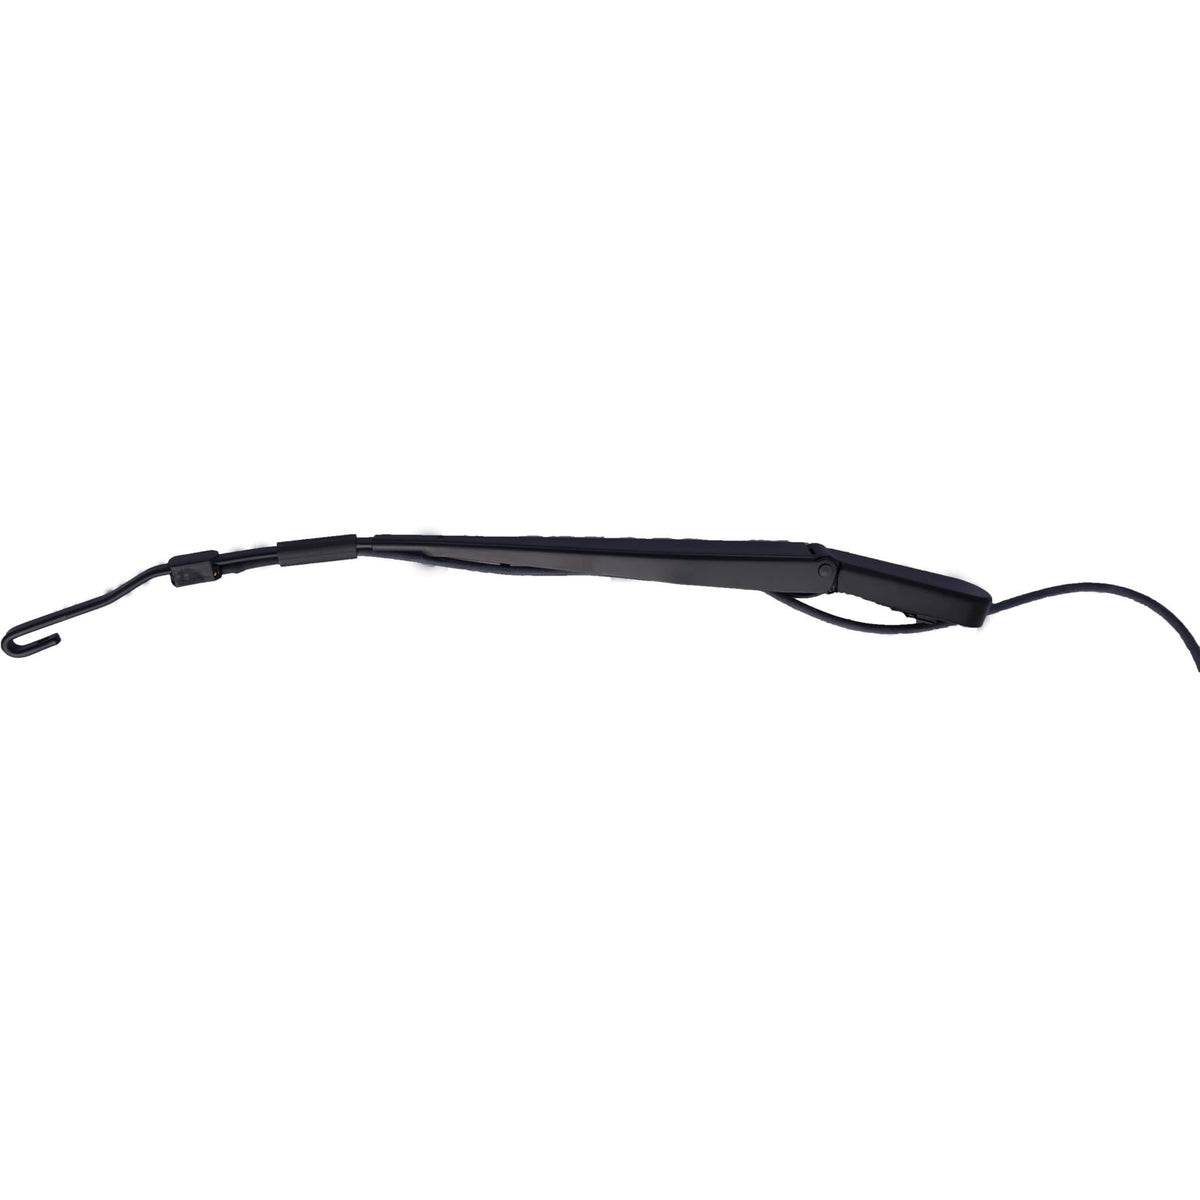 Freightliner Cascadia Wiper System Parts - AutoTex